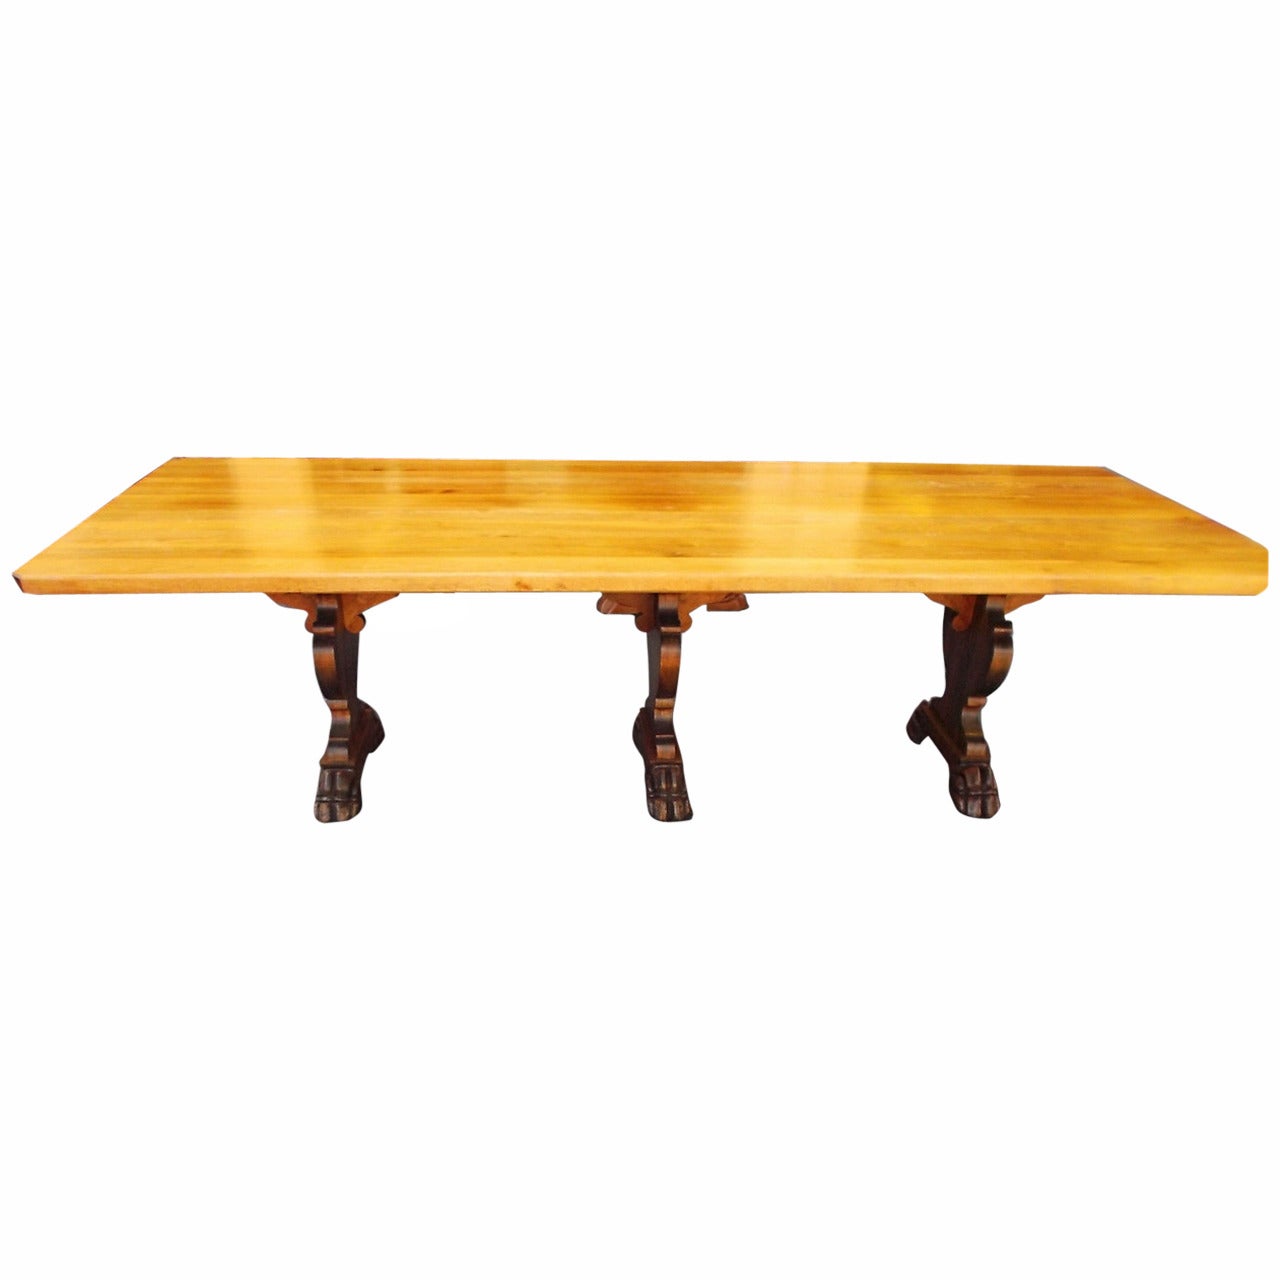 Superb Large Antique Style Walnut Refractory Dining or Kitchen Table